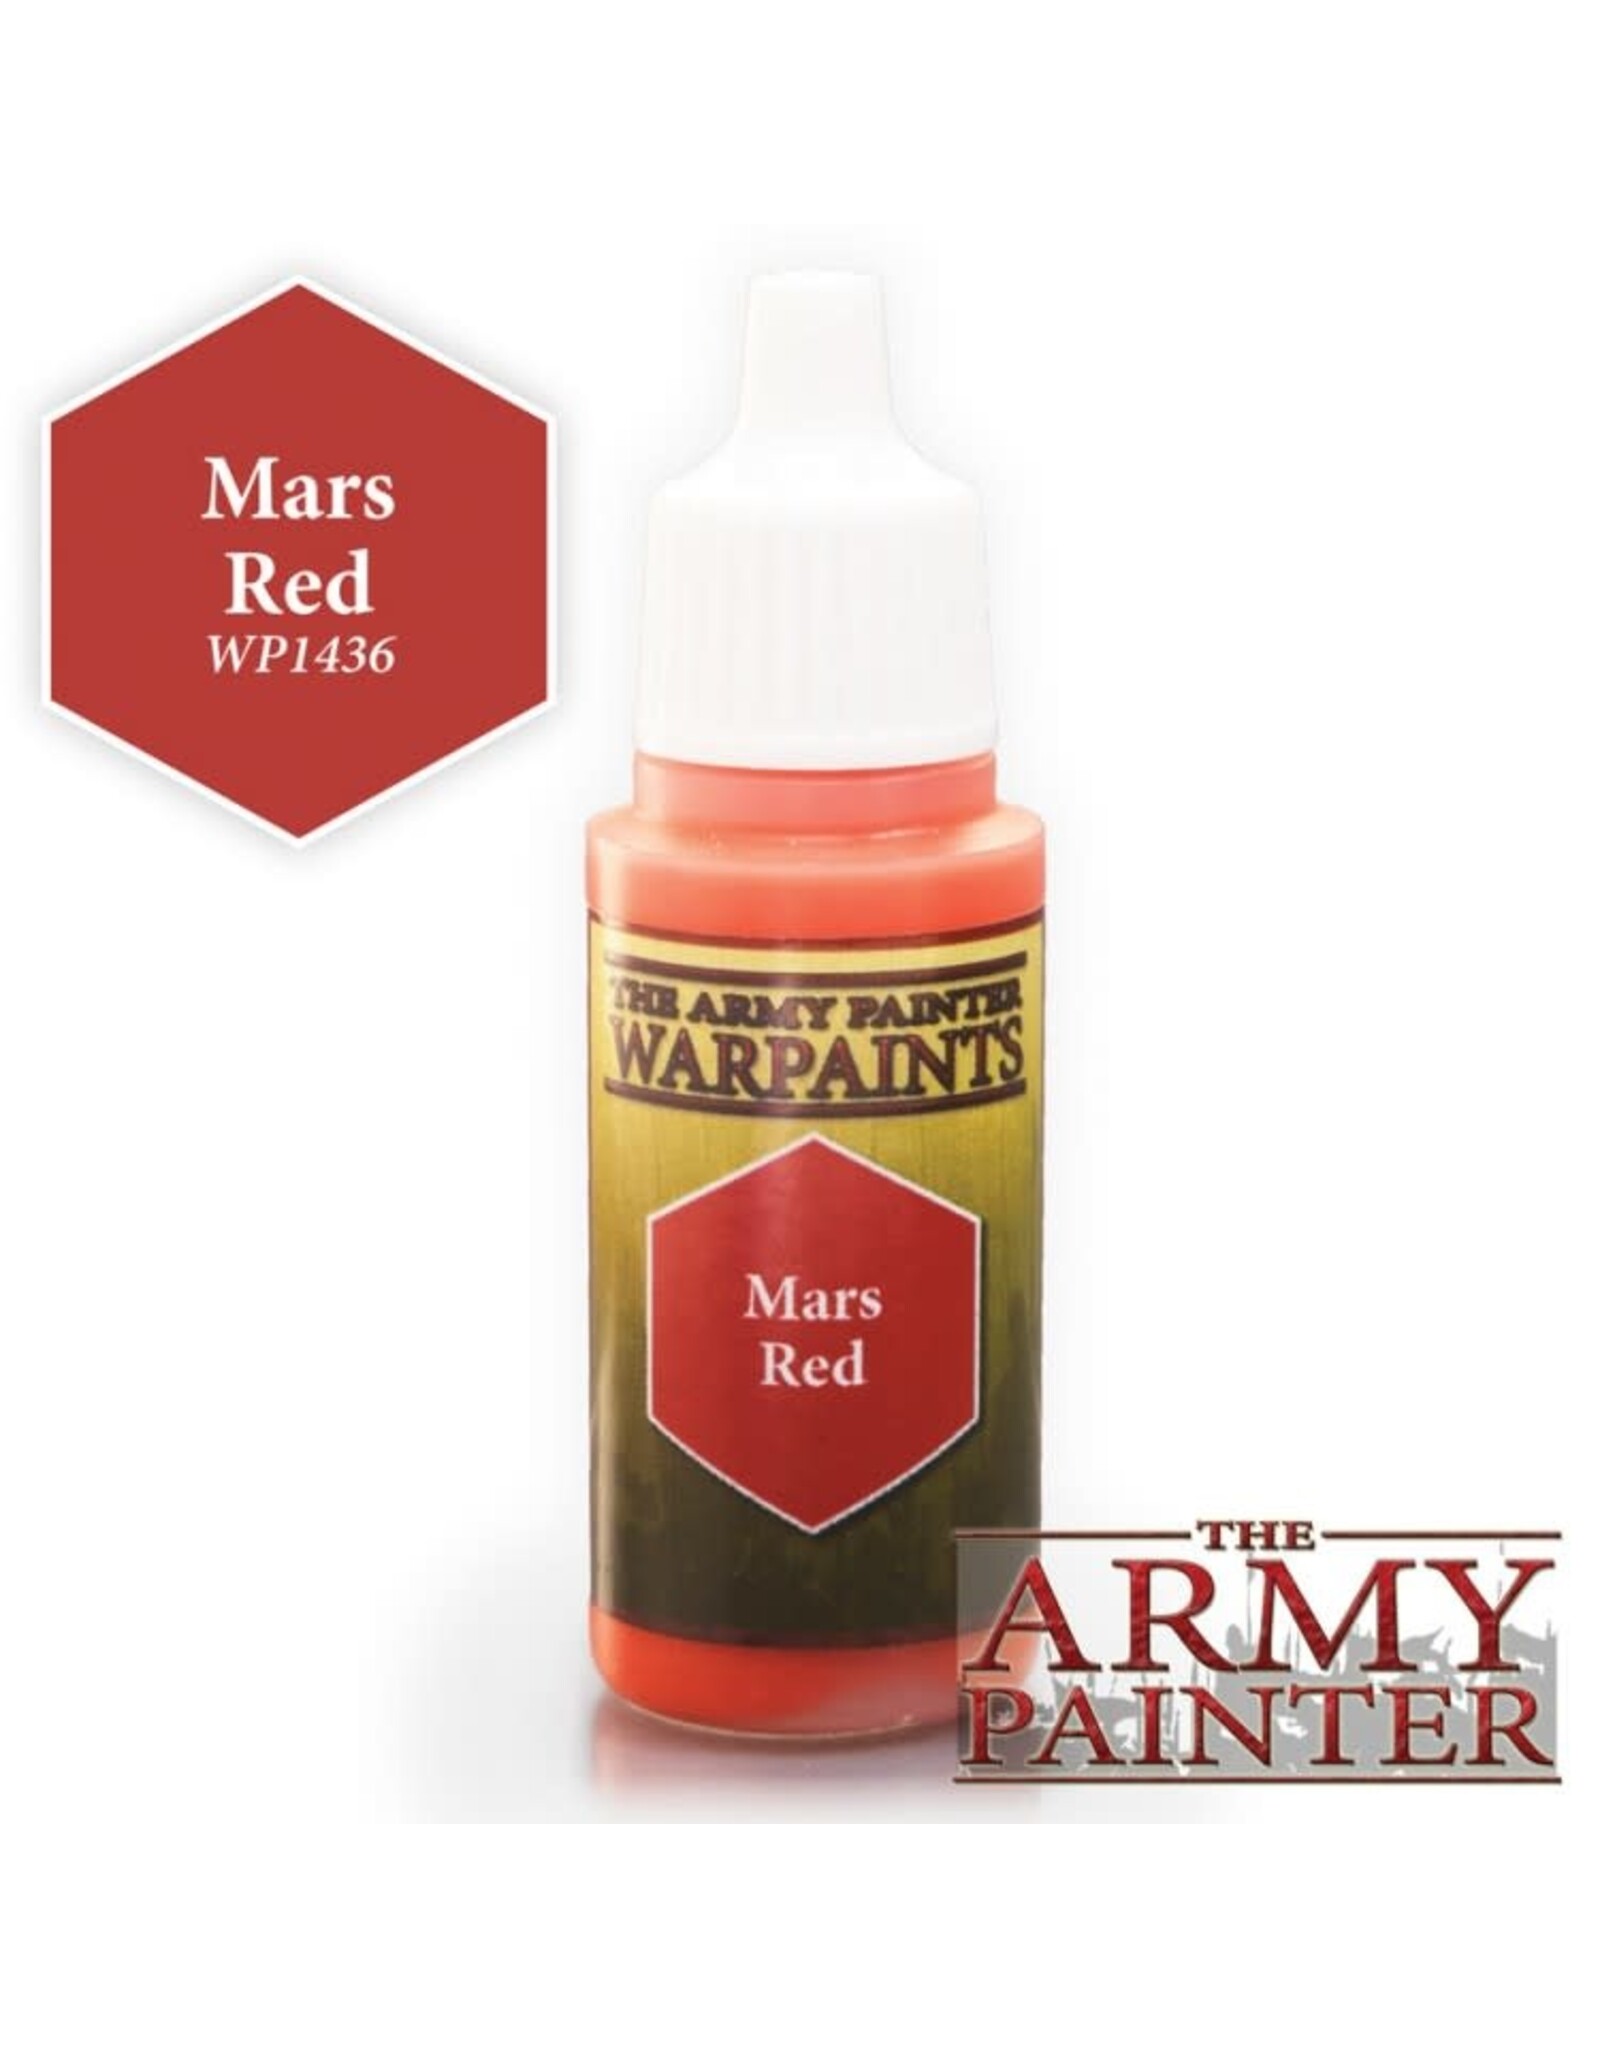 Army Painter Warpaints: Mars Red